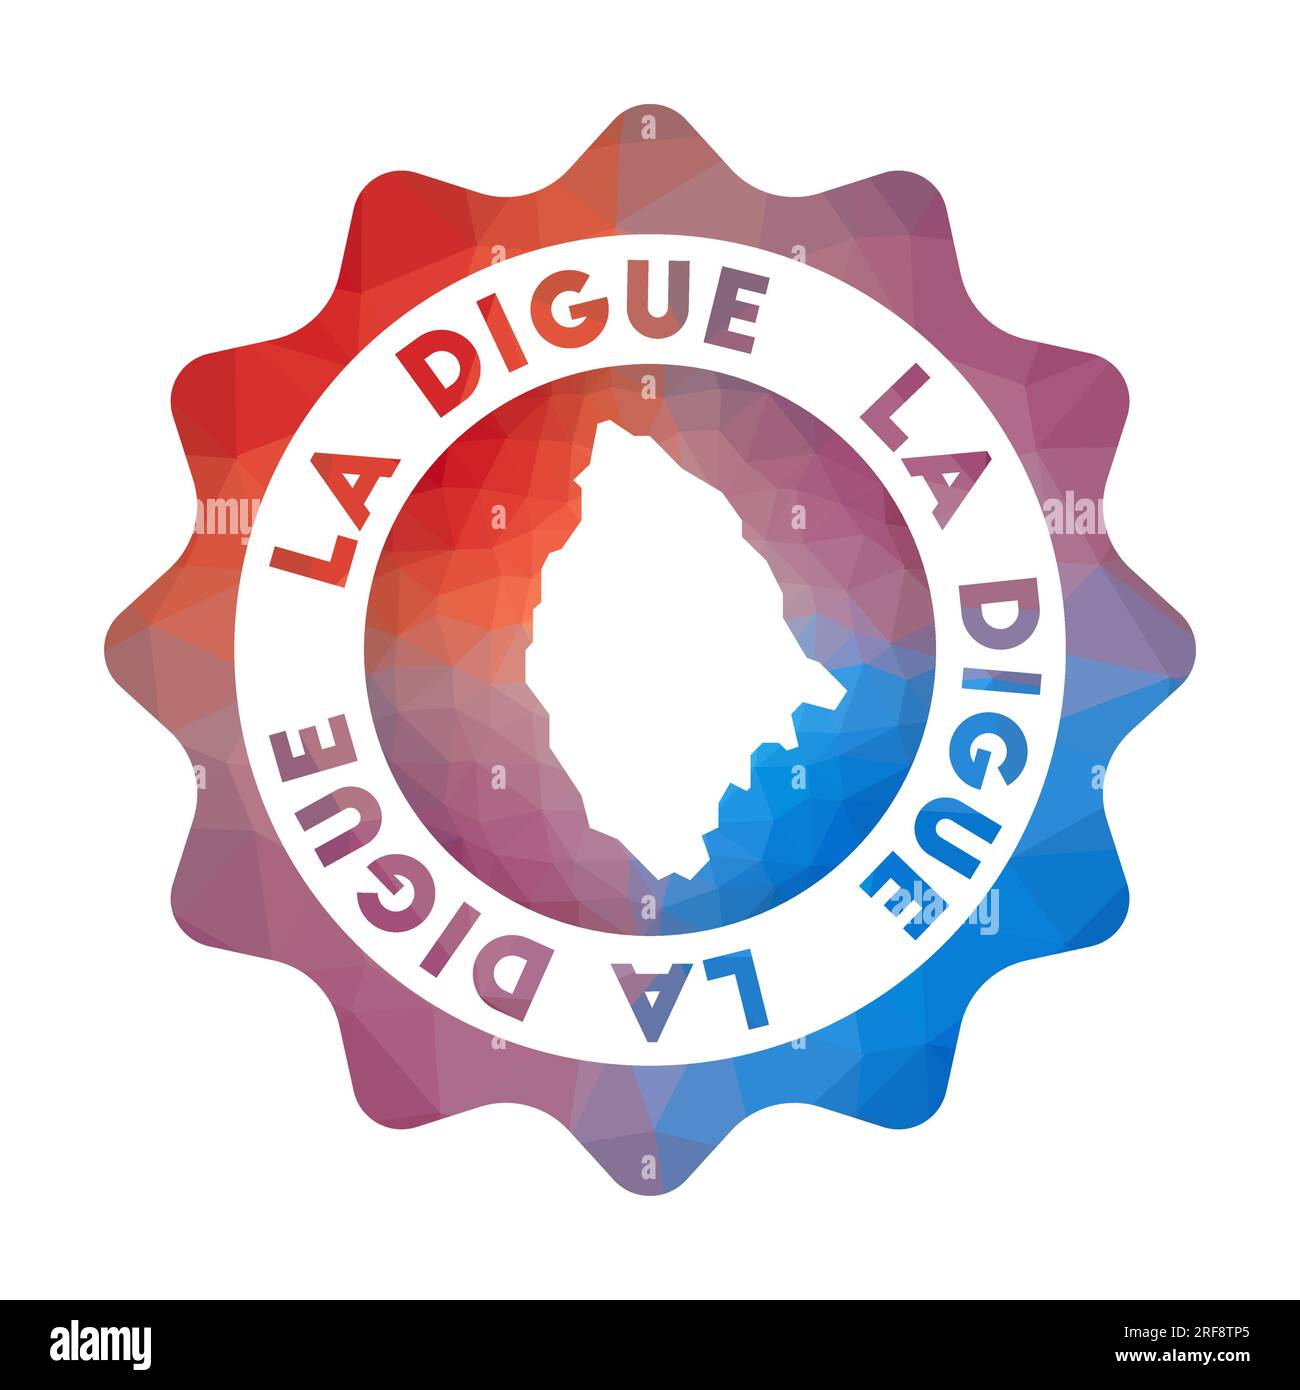 La Digue low poly logo. Colorful gradient travel logo of the island in ...